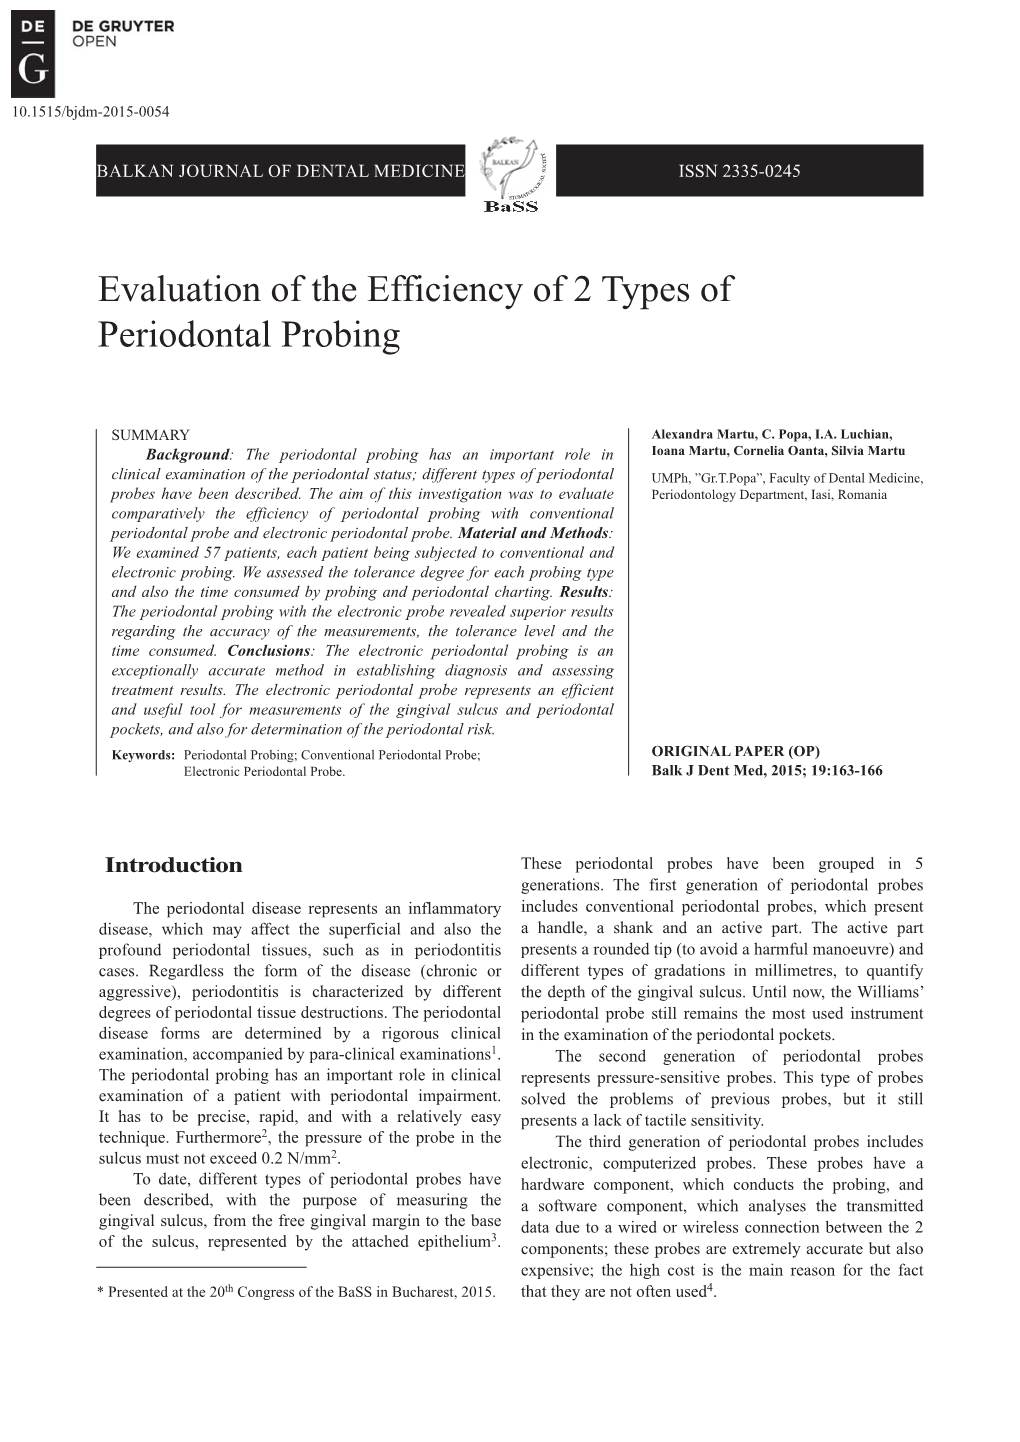 Evaluation of the Efficiency of 2 Types of Periodontal Probing